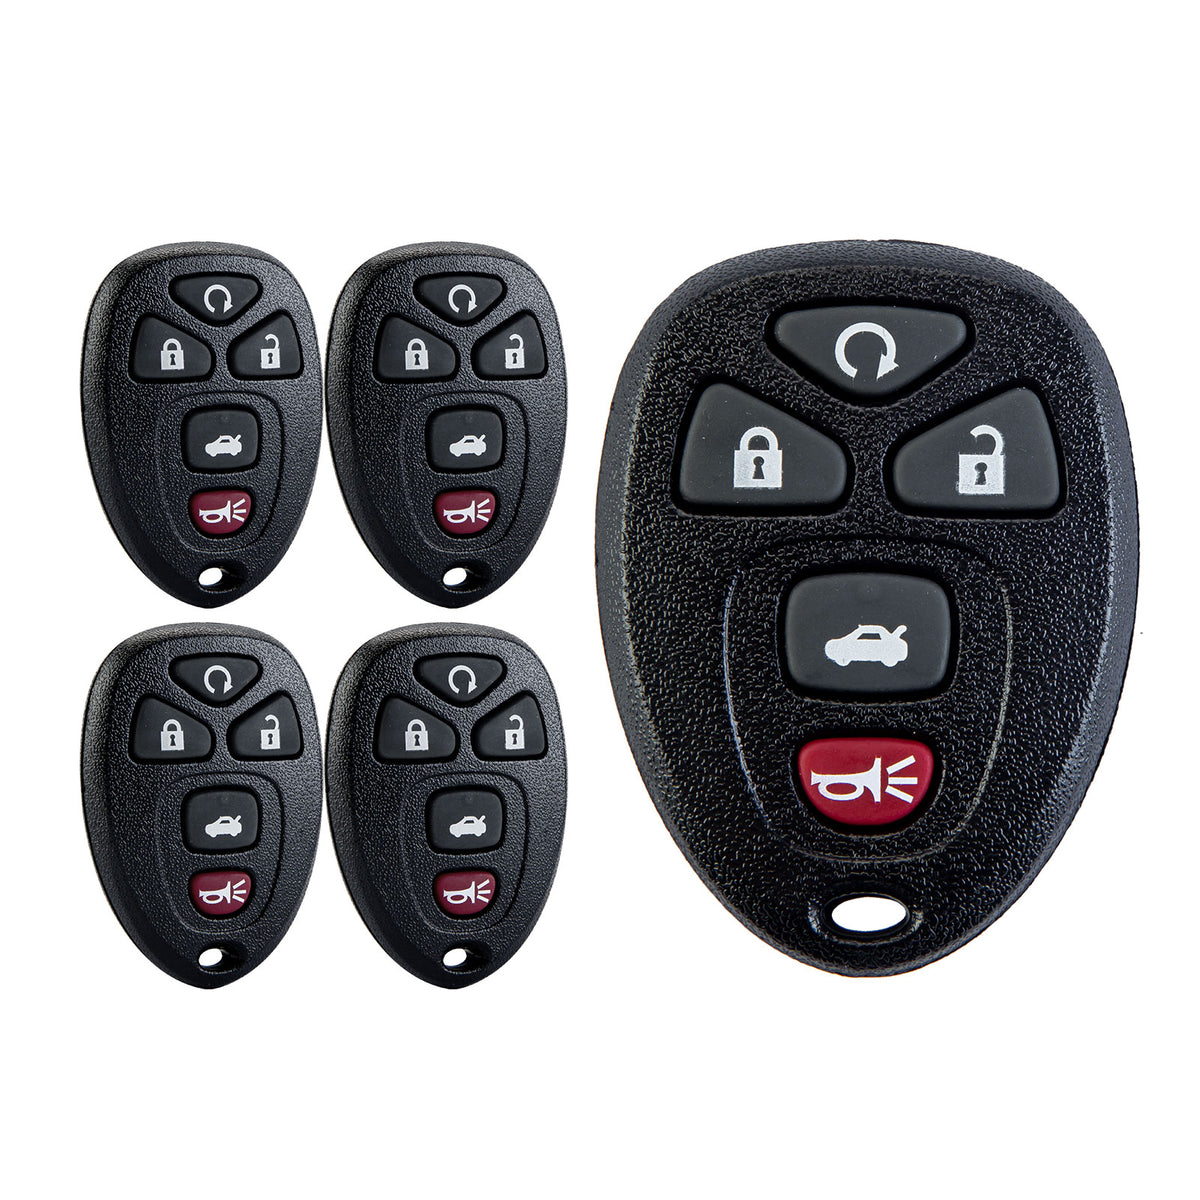 5 Button Keyless Entry Remote Replacement for 2006-2013 Chevy Impala Monte Carlo/Cadillac DTS/Buick Lucerne OUC60270  KR-C5RA